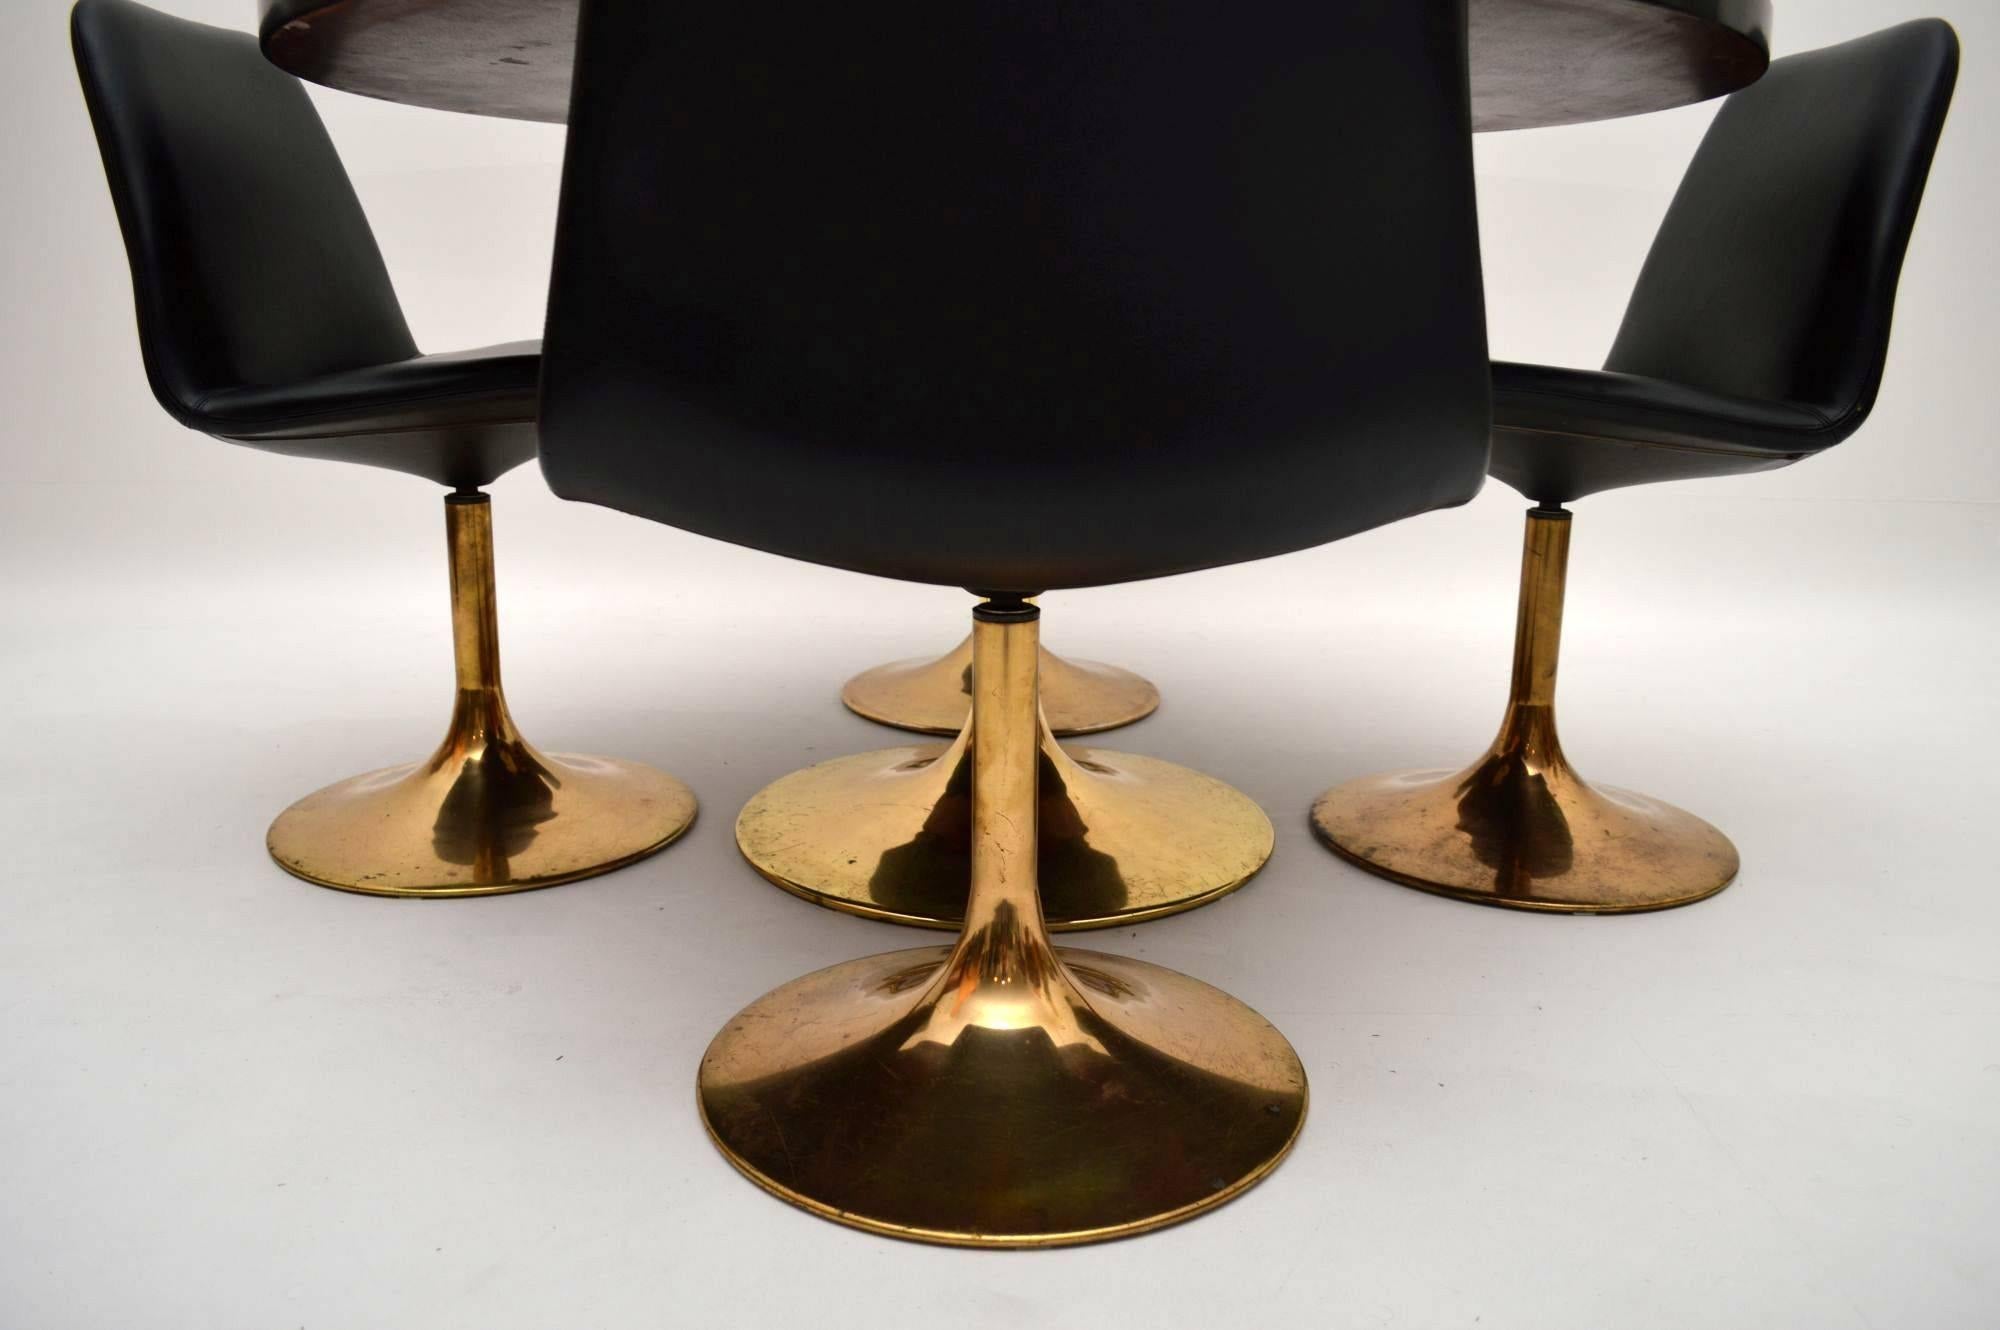 A stunning retro dining set by Borje Johanson, this was made in Sweden, it dates from the 1960s. The dining table has been ebonised and re-polished, the condition is perfect on the top. The dining chairs are covered in black vinyl, which is also in